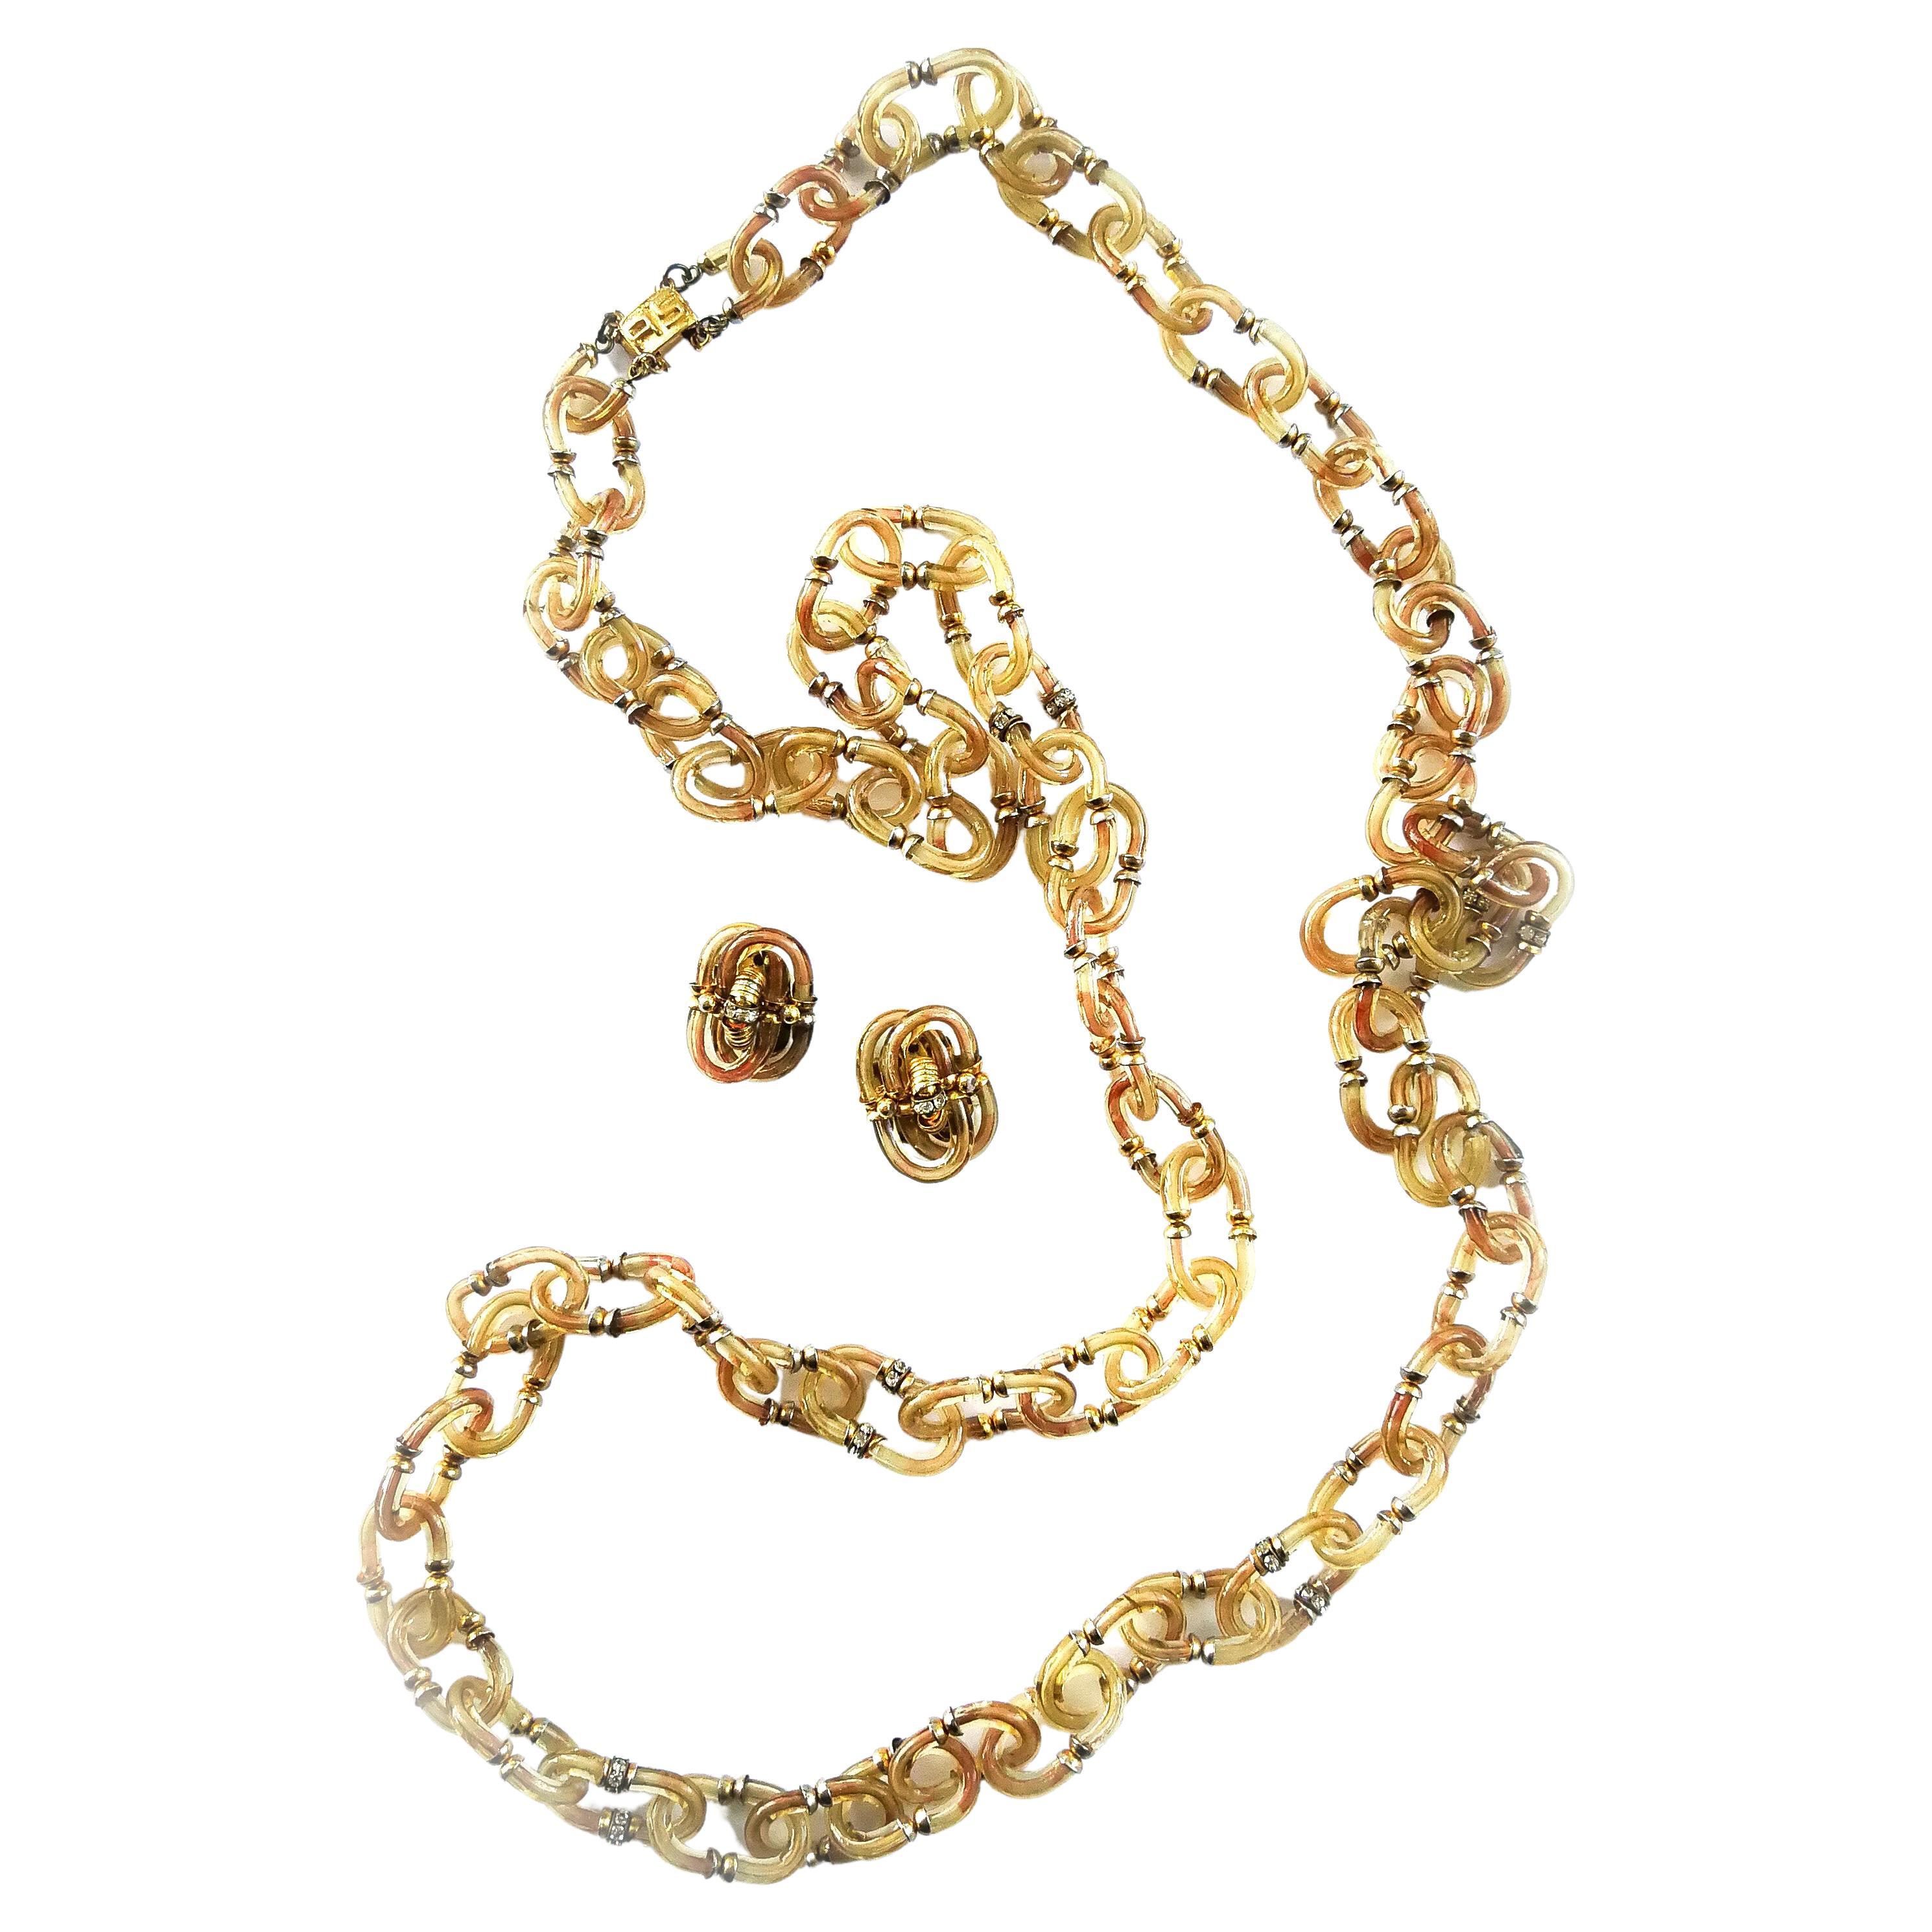 An exceptional and delicately coloured, exceptionally long glass chain necklace, made by Archimede Seguso, part of a specially commissioned collection by Chanel in the late 1960s.  In a delicate and refined citrine colour overall, there are touches